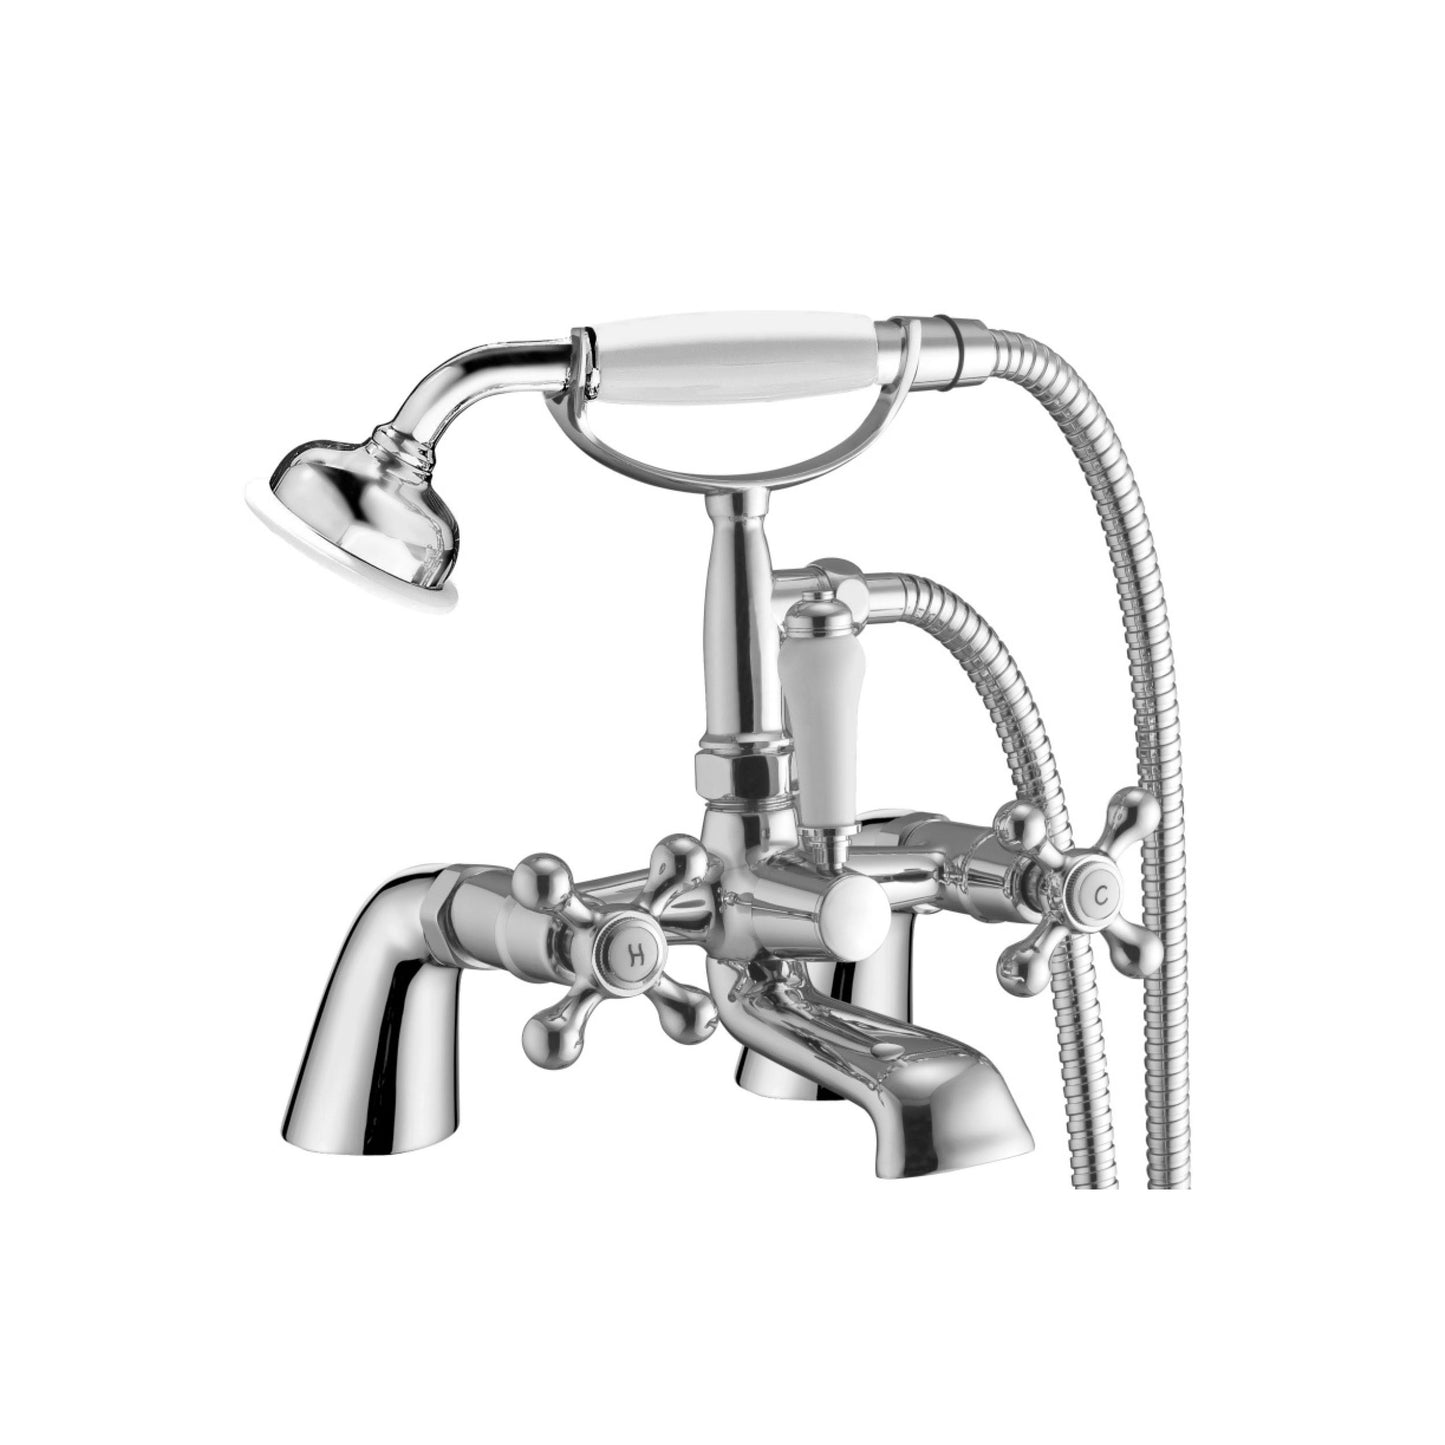 Classica Bath Shower Mixer Tap with Cradle